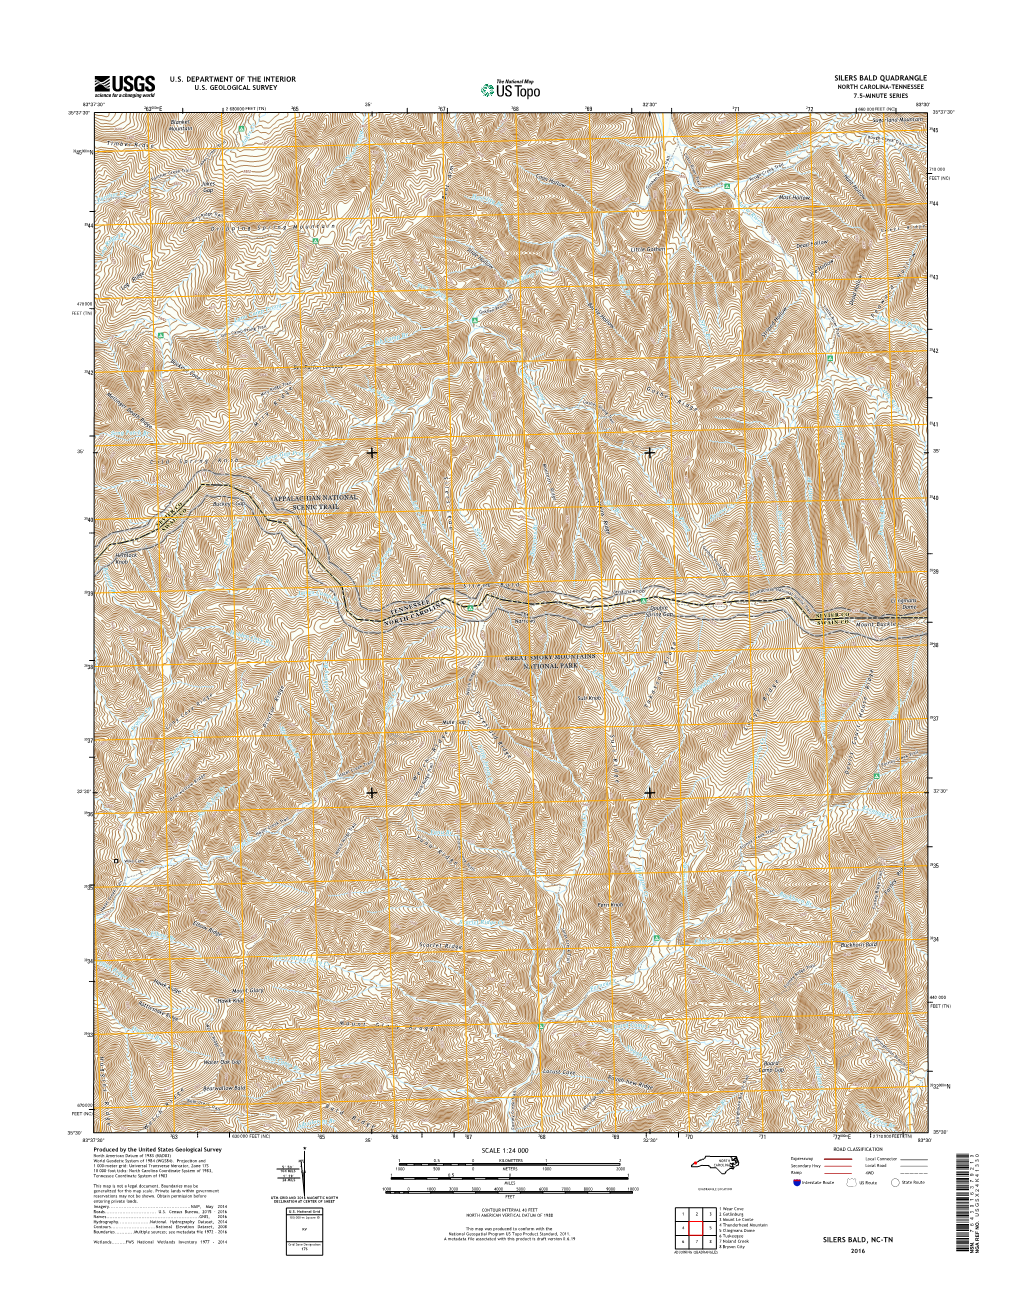 USGS 7.5-Minute Image Map for Silers Bald, North Carolina